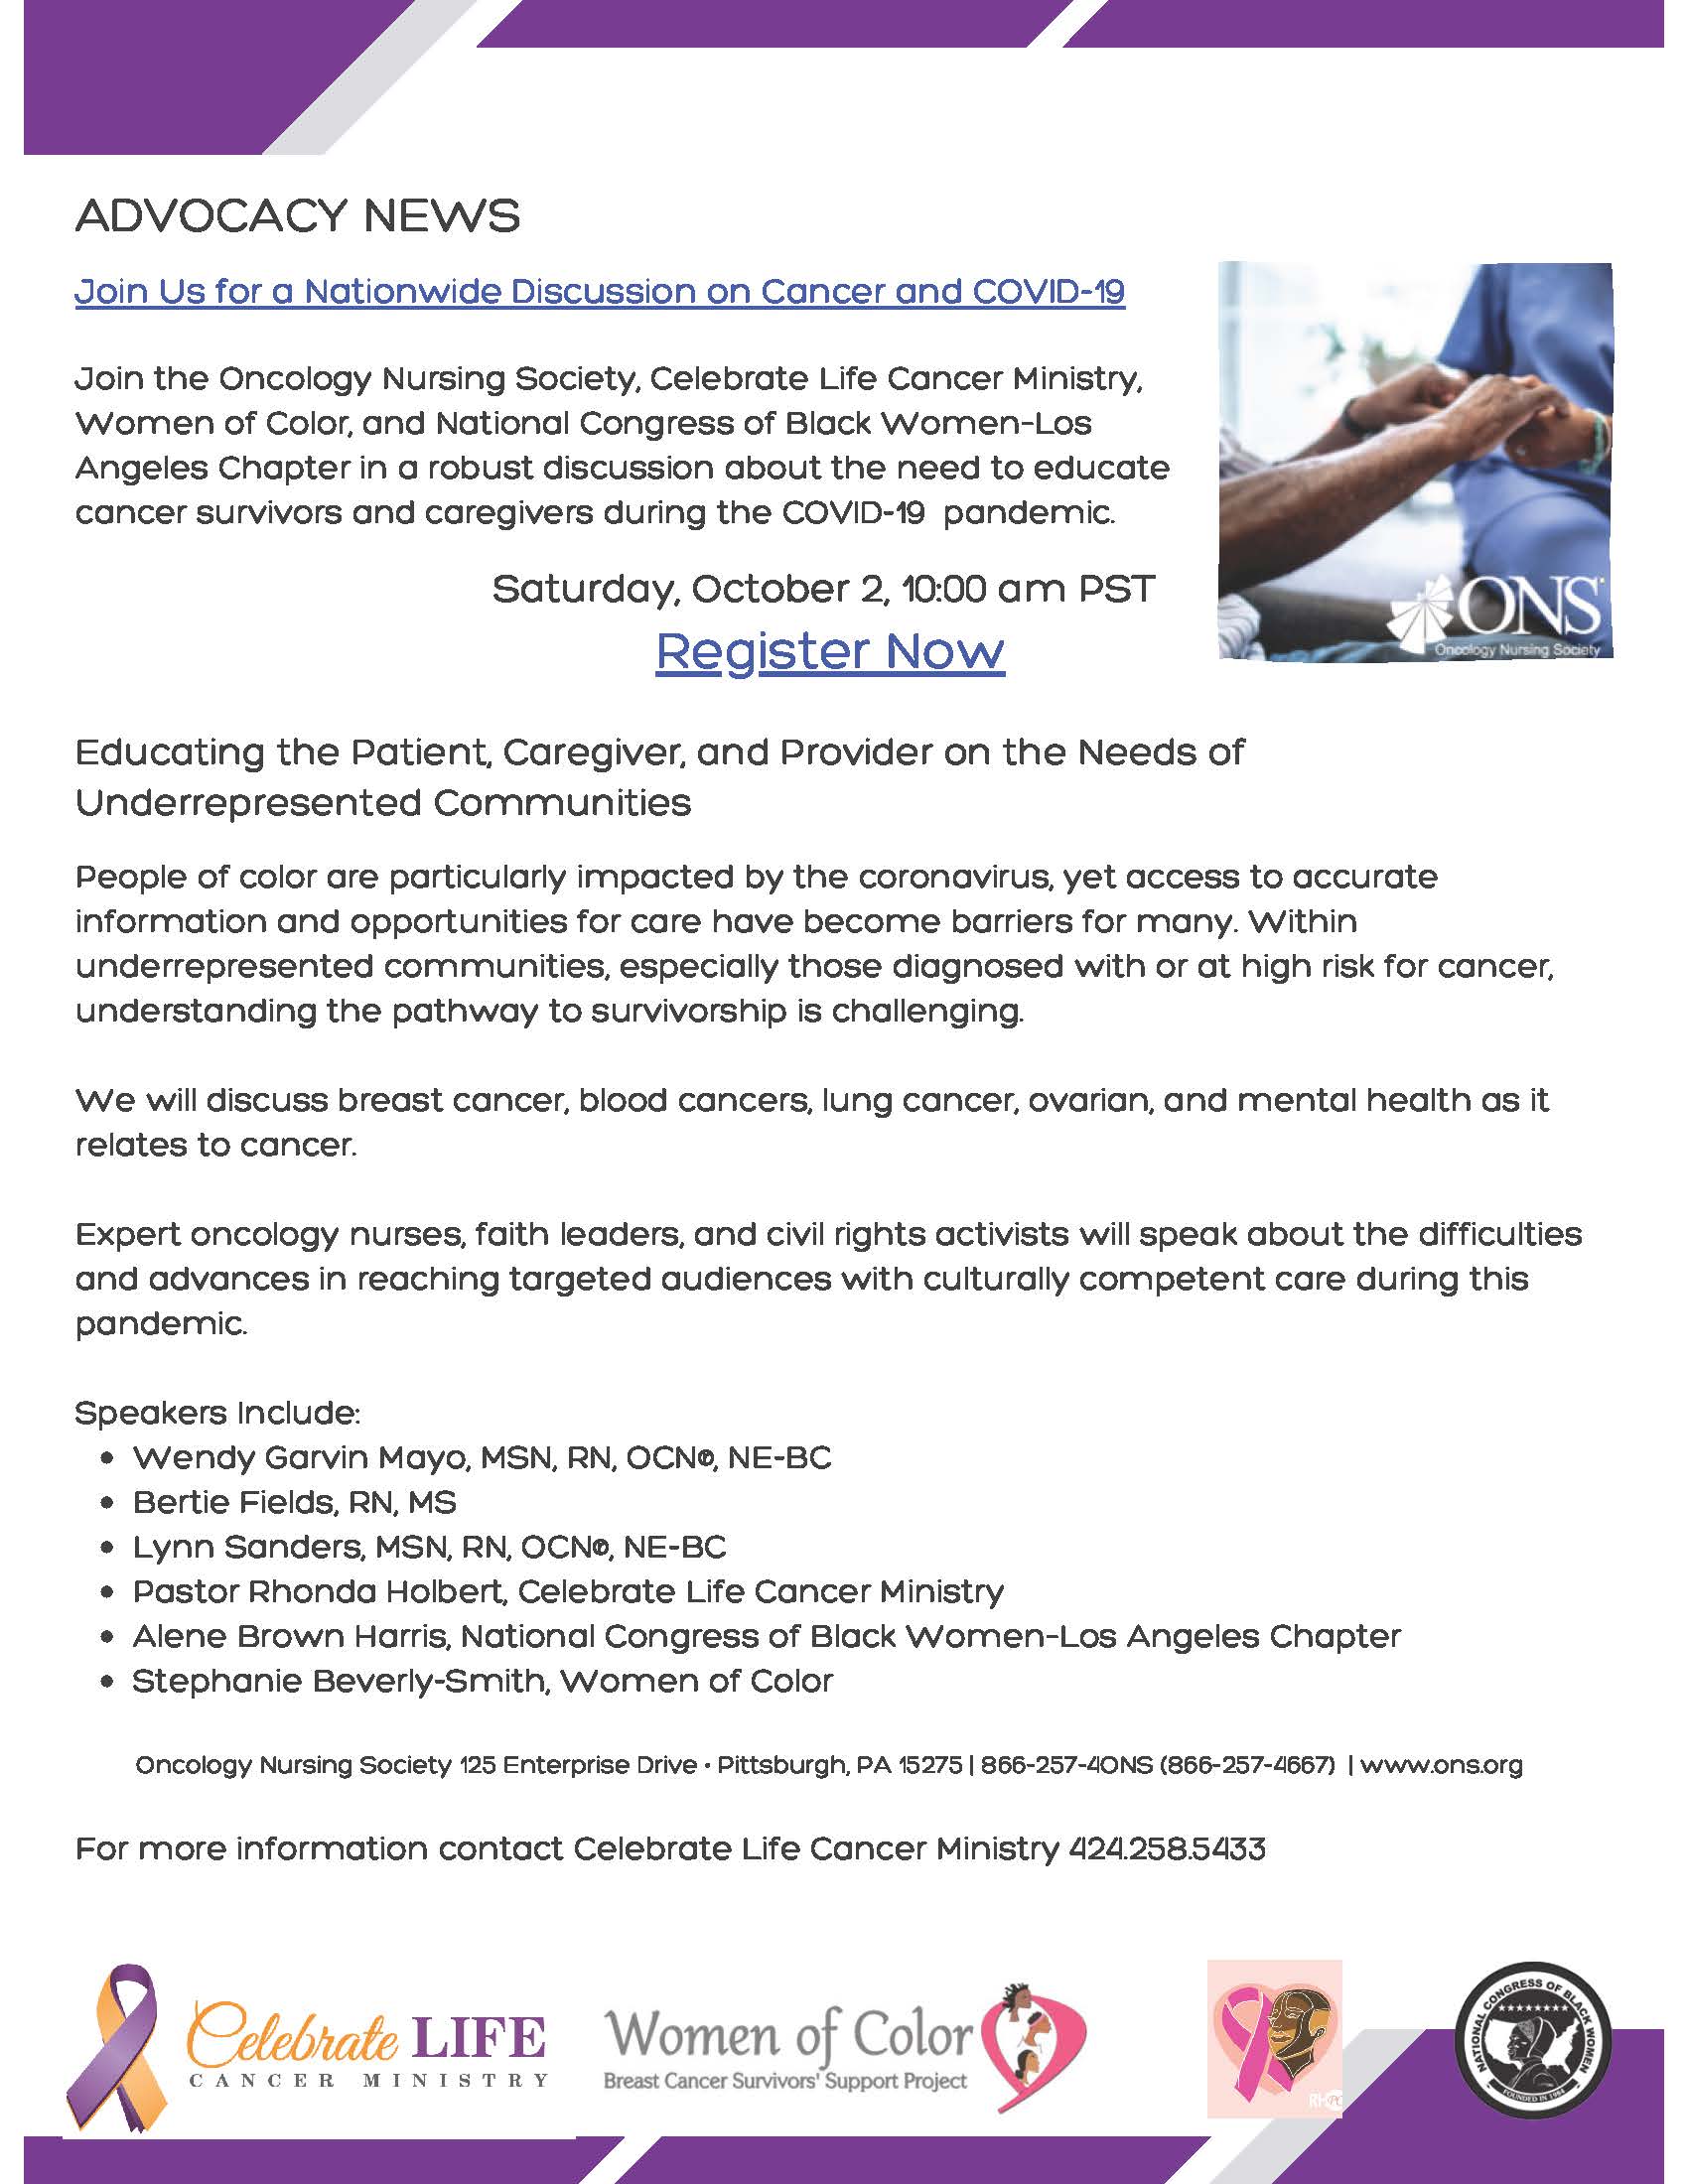 2021-ADVOCACY NEWS Join Us for a Nationwide Discussion on Cancer and COVID-19 Join the Oncology Nursing Society, Celebrate Life Cancer Ministry, Women of Color, and National Congress